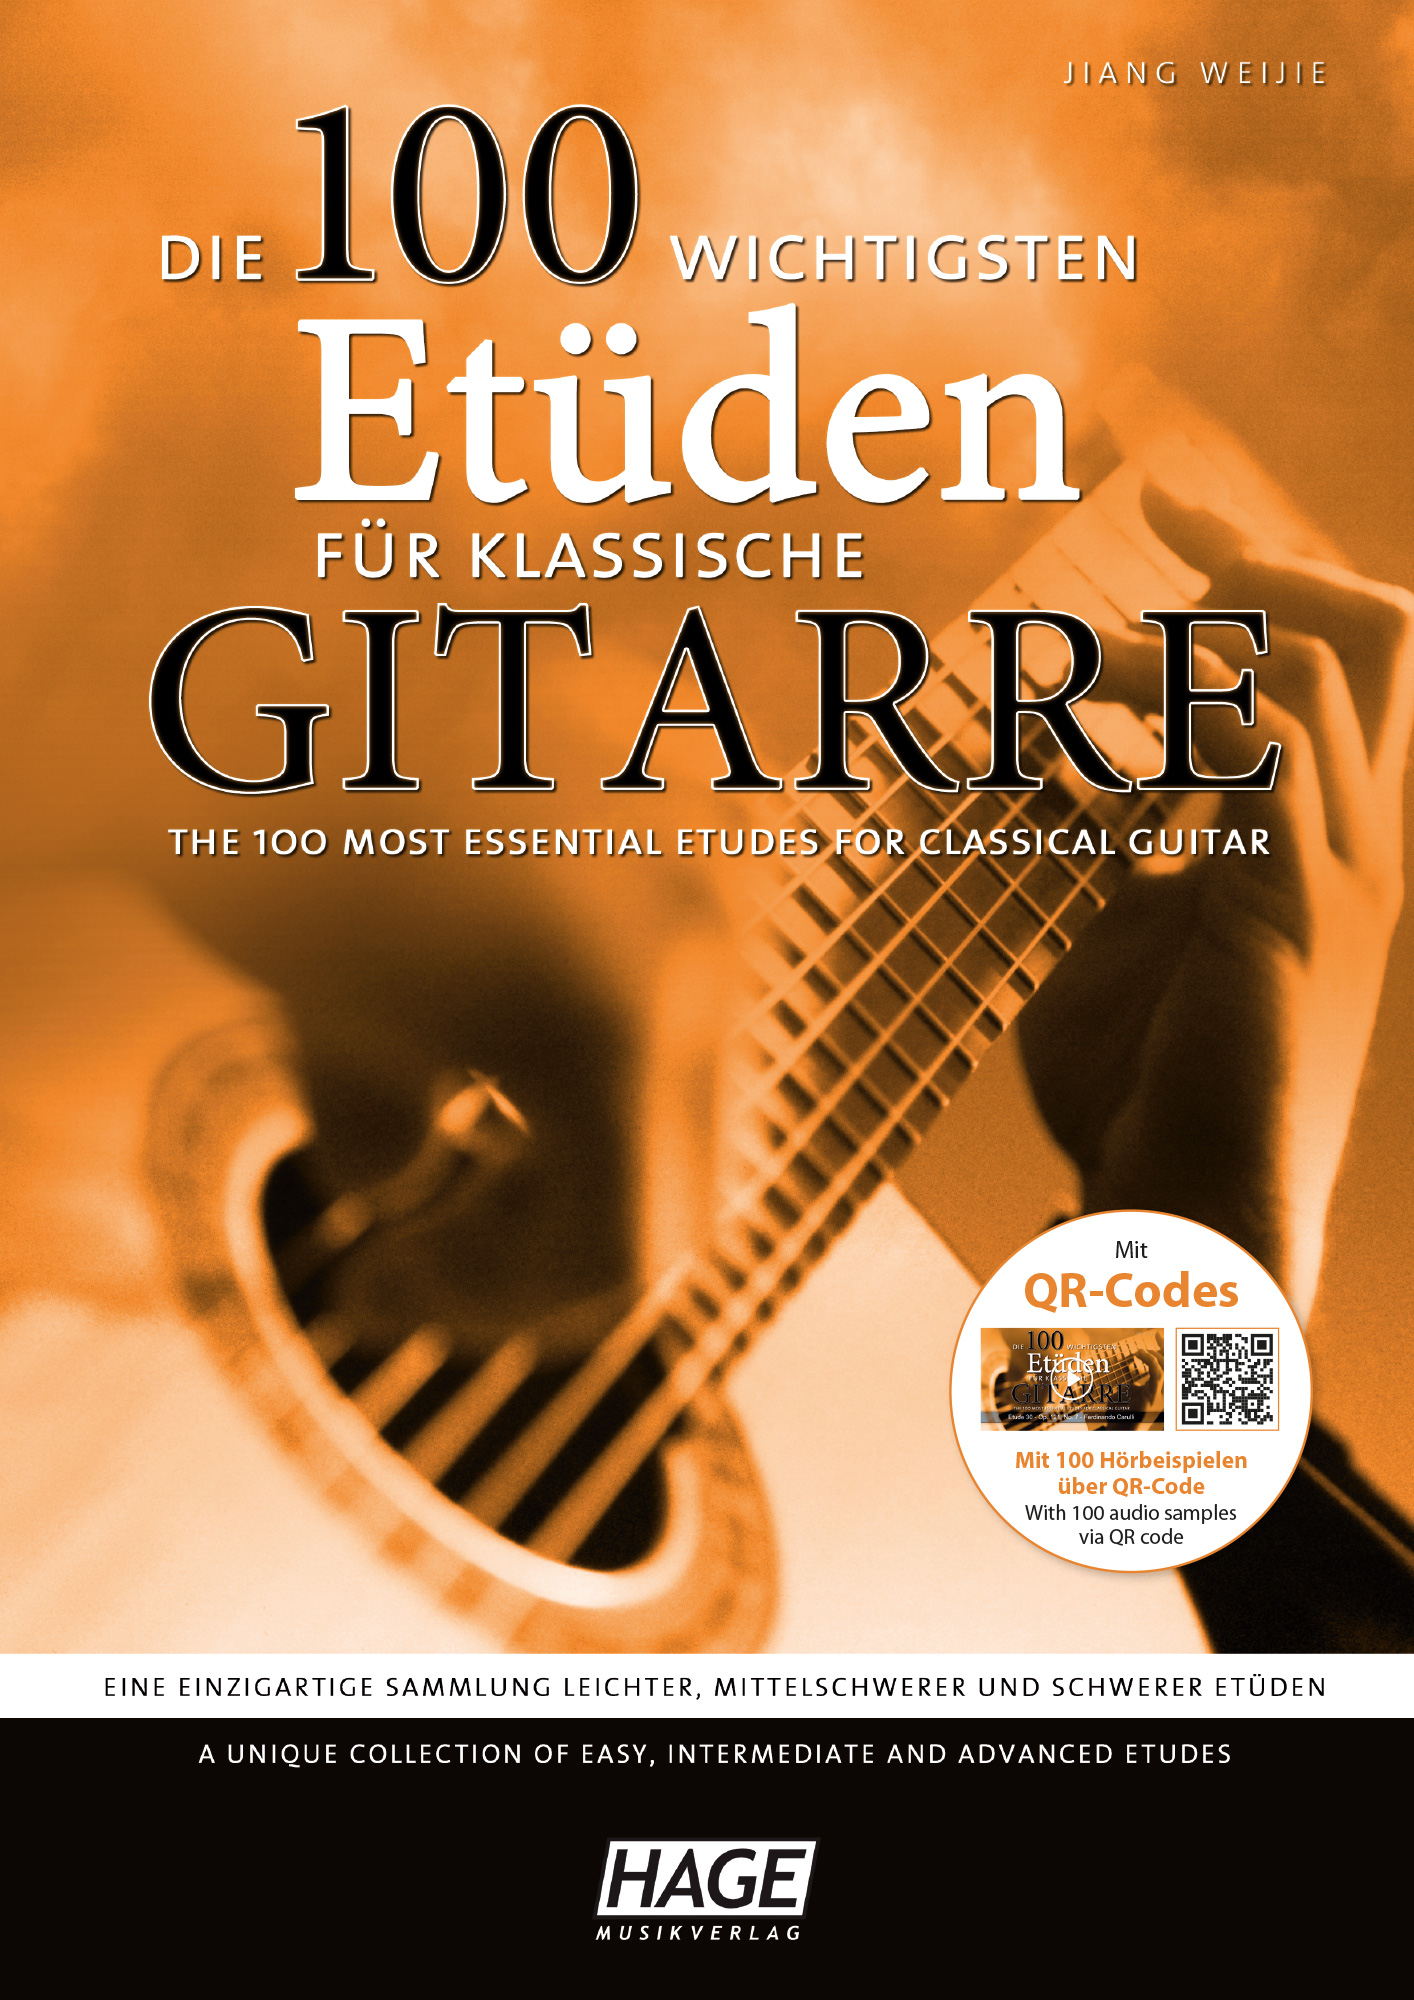 The 100 most important etudes for classical guitar (with QR-Code